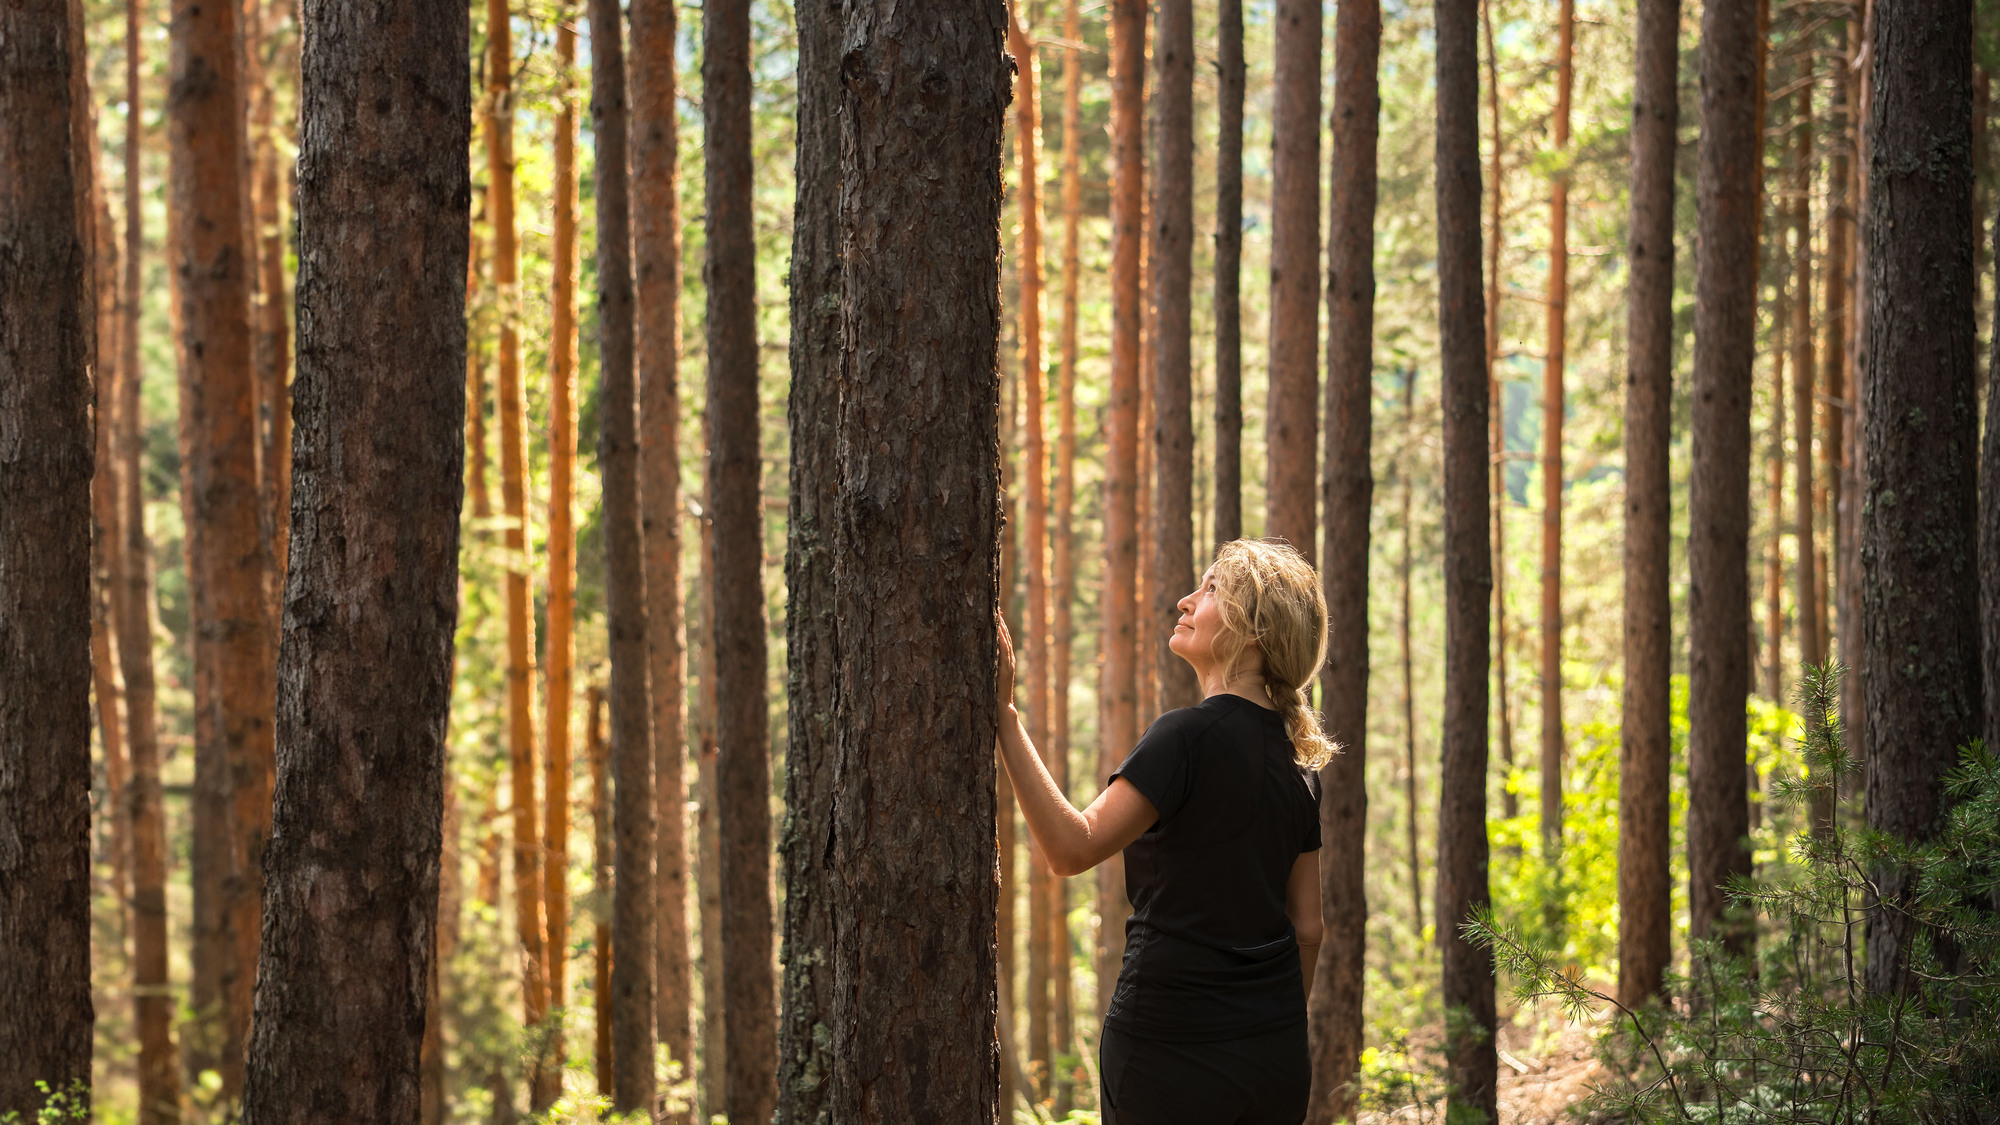 A woman admiring trees in a sunny forest